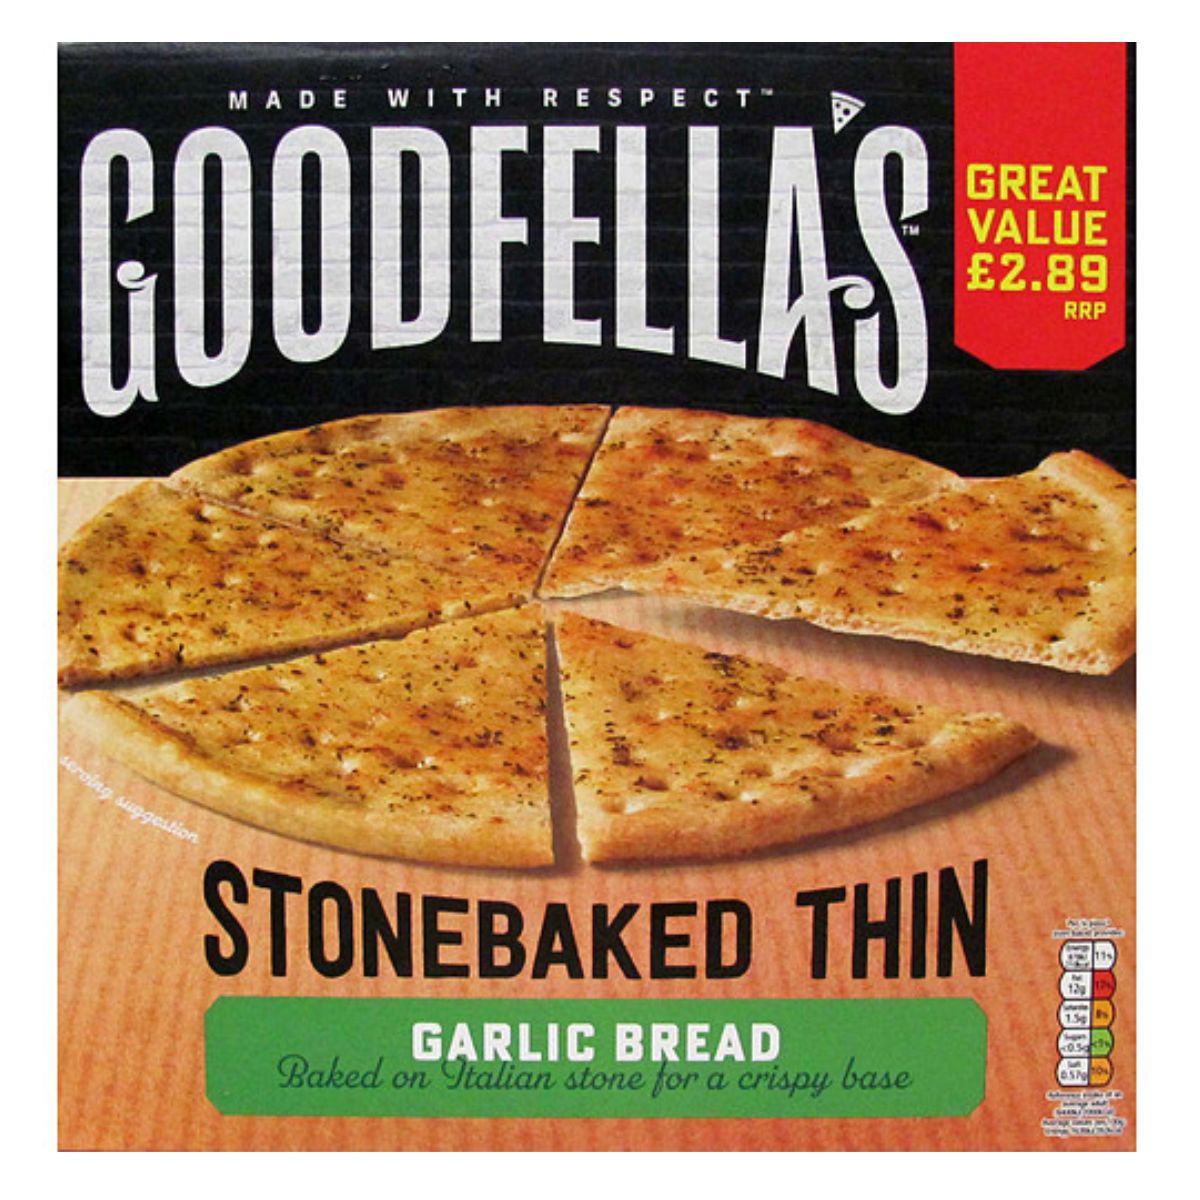 Packaging of Goodfellas - Garlic Bread - 218g with the price tag of £2.89, emphasizing its crispy base and great value.